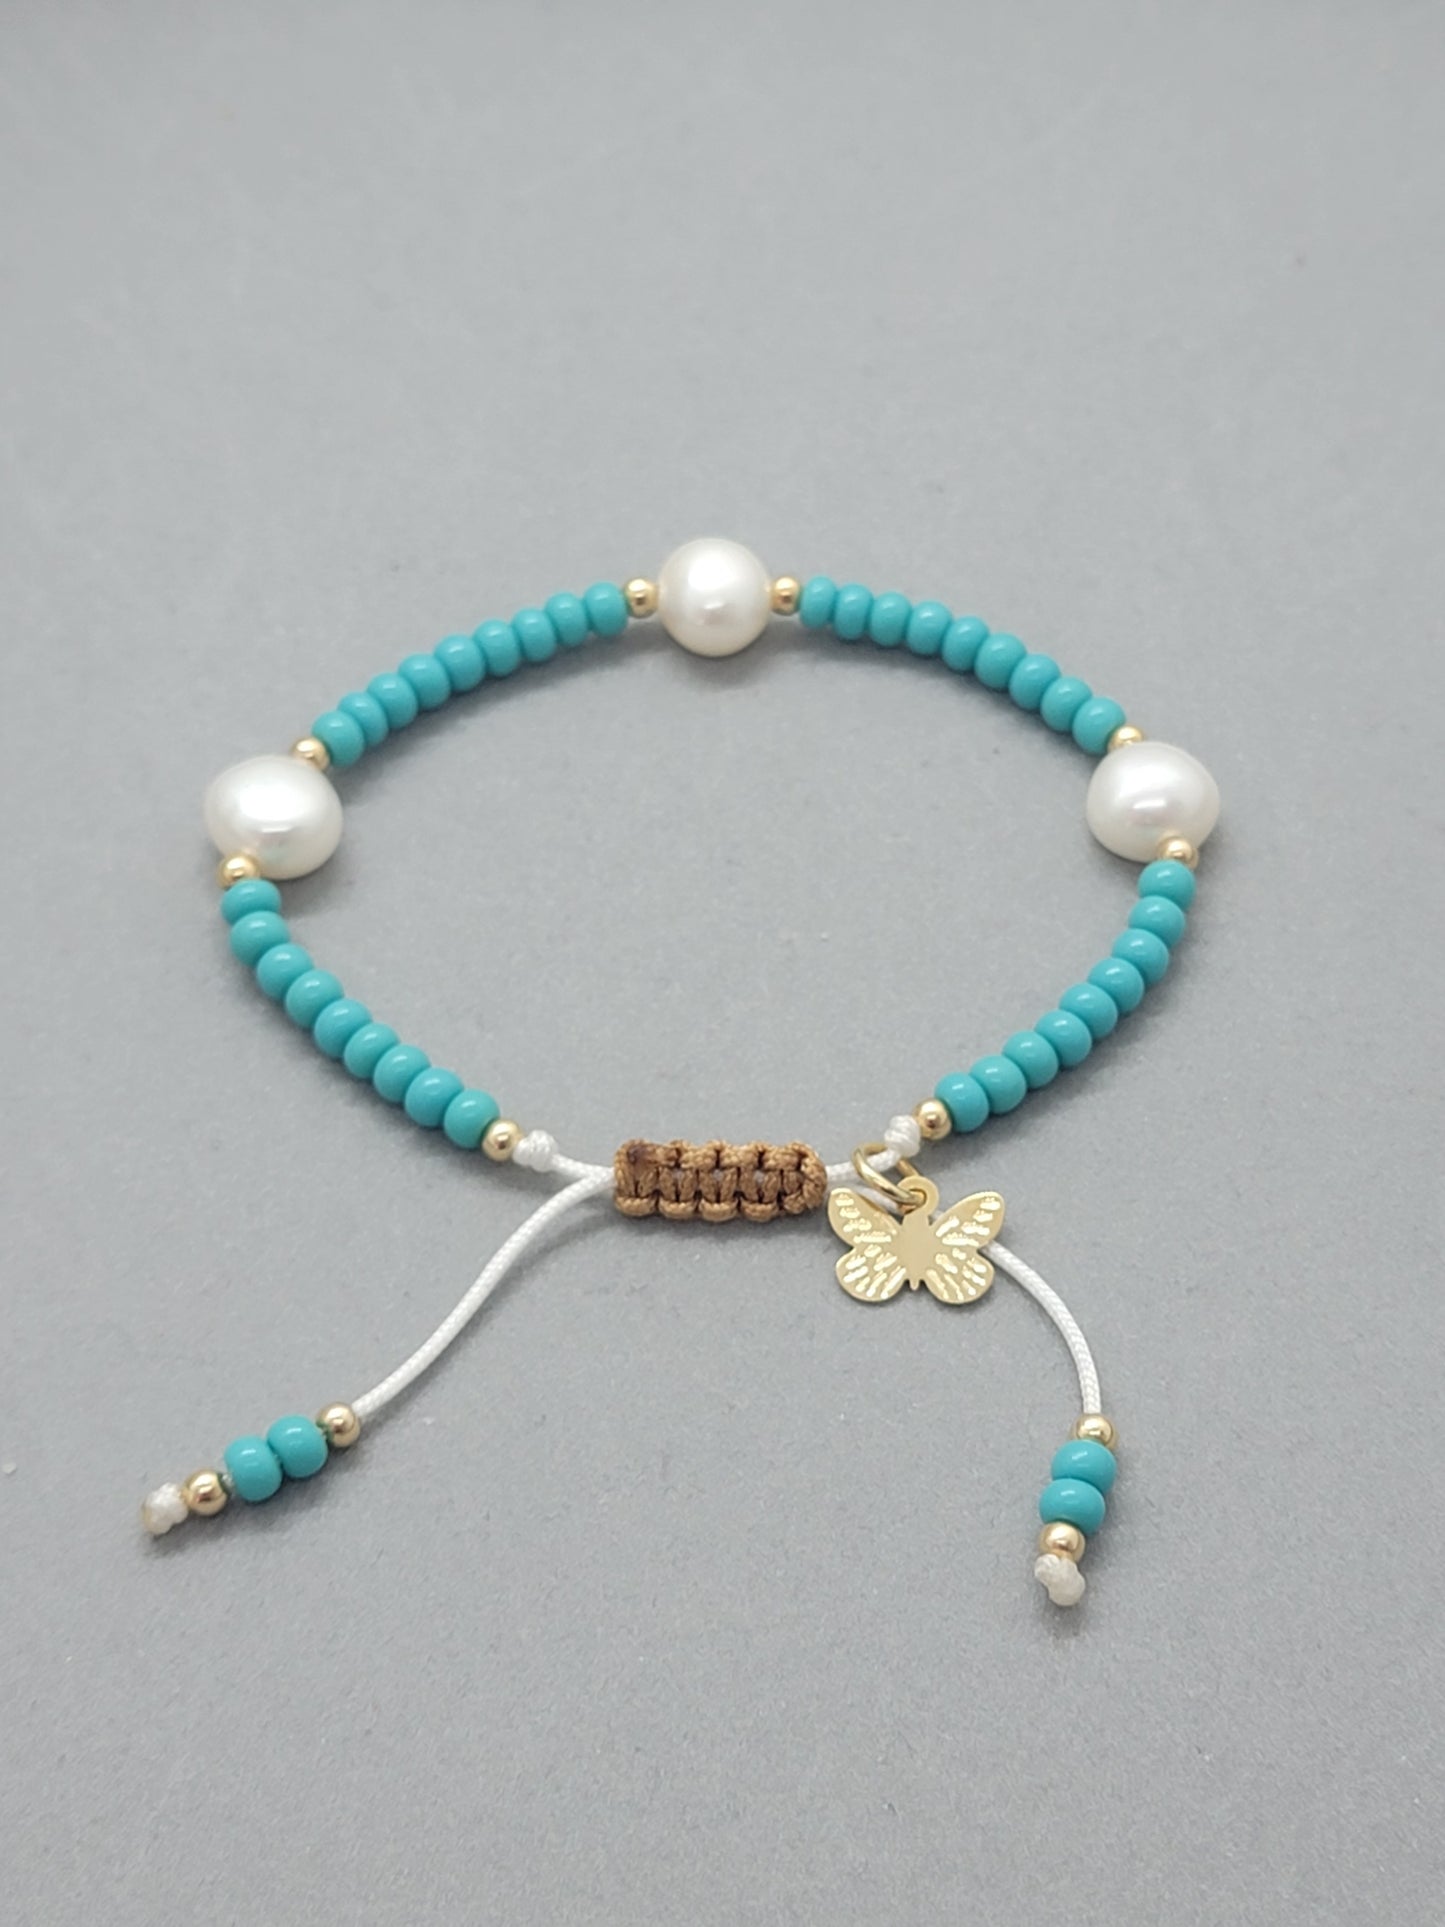 Handmade Beaded Bracelet with Freshwater Pearls and 18k Gold-Filled Butterfly Charm